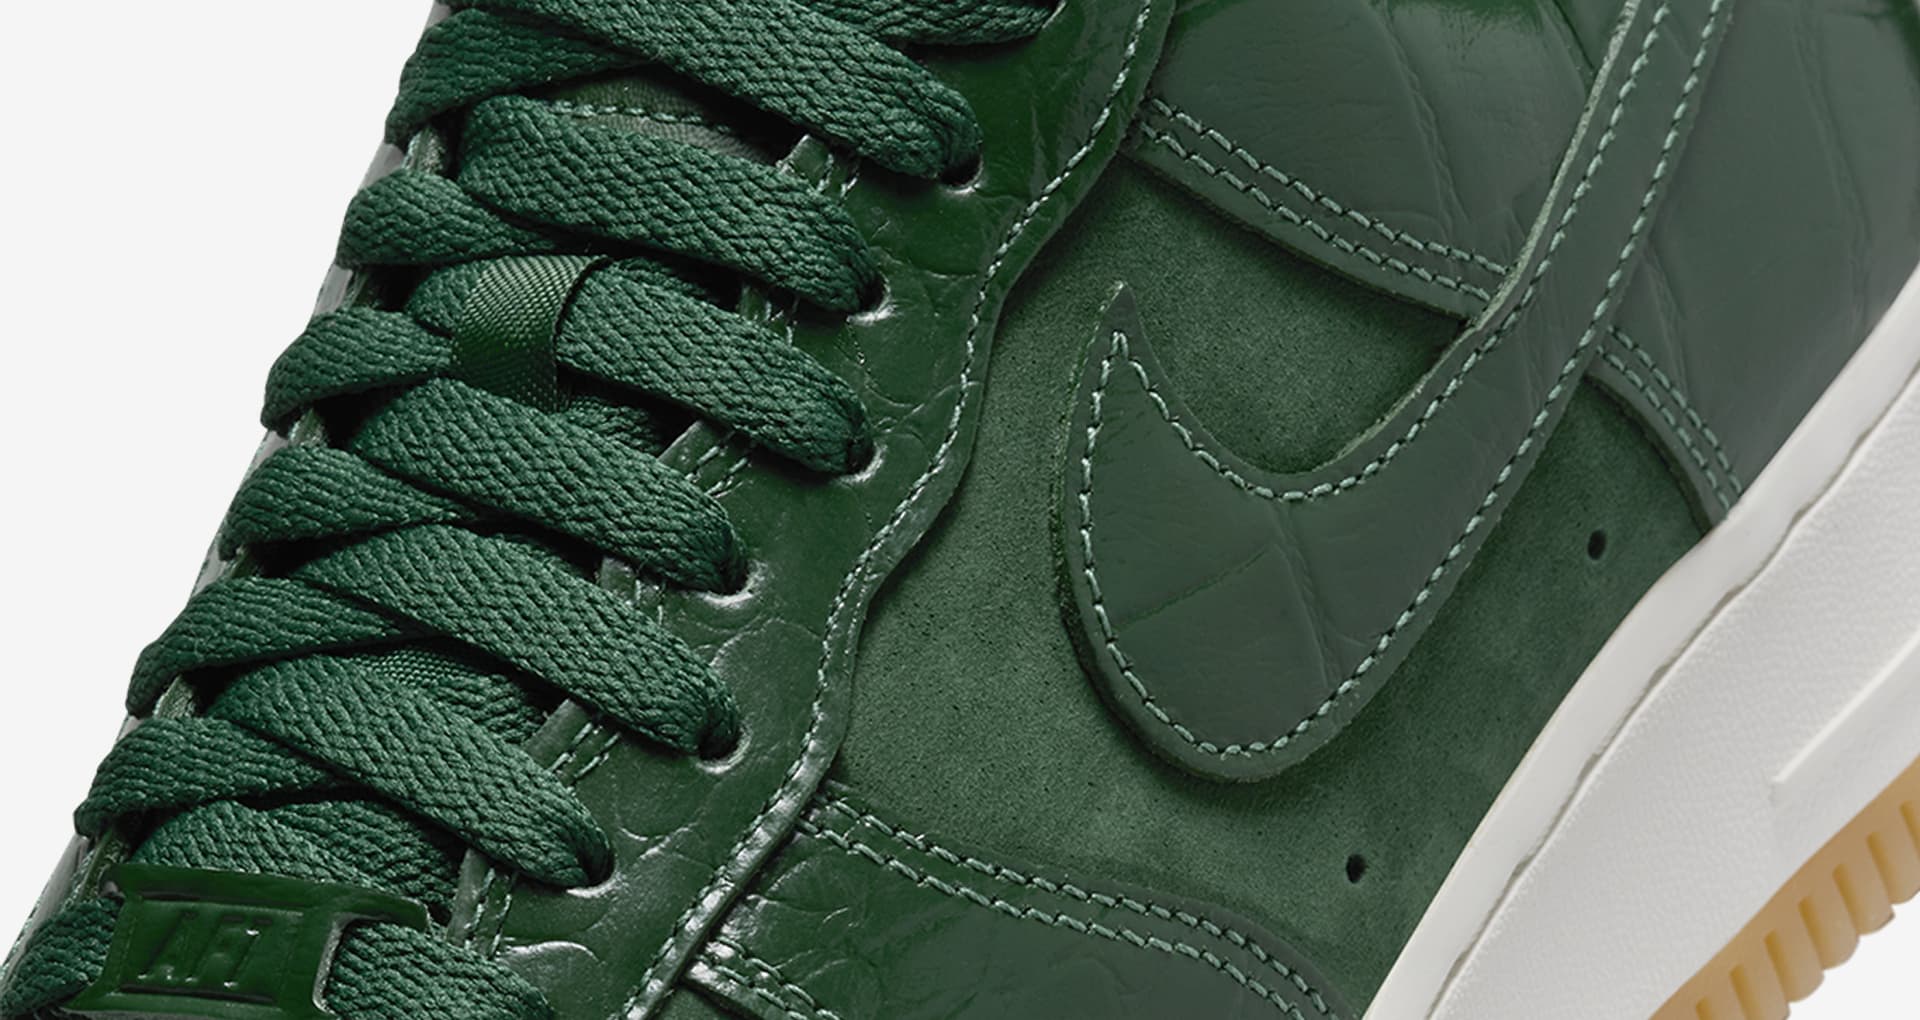 Women's Air Force 1 '07 'Gorge Green' (DZ2708-300) release date. Nike ...